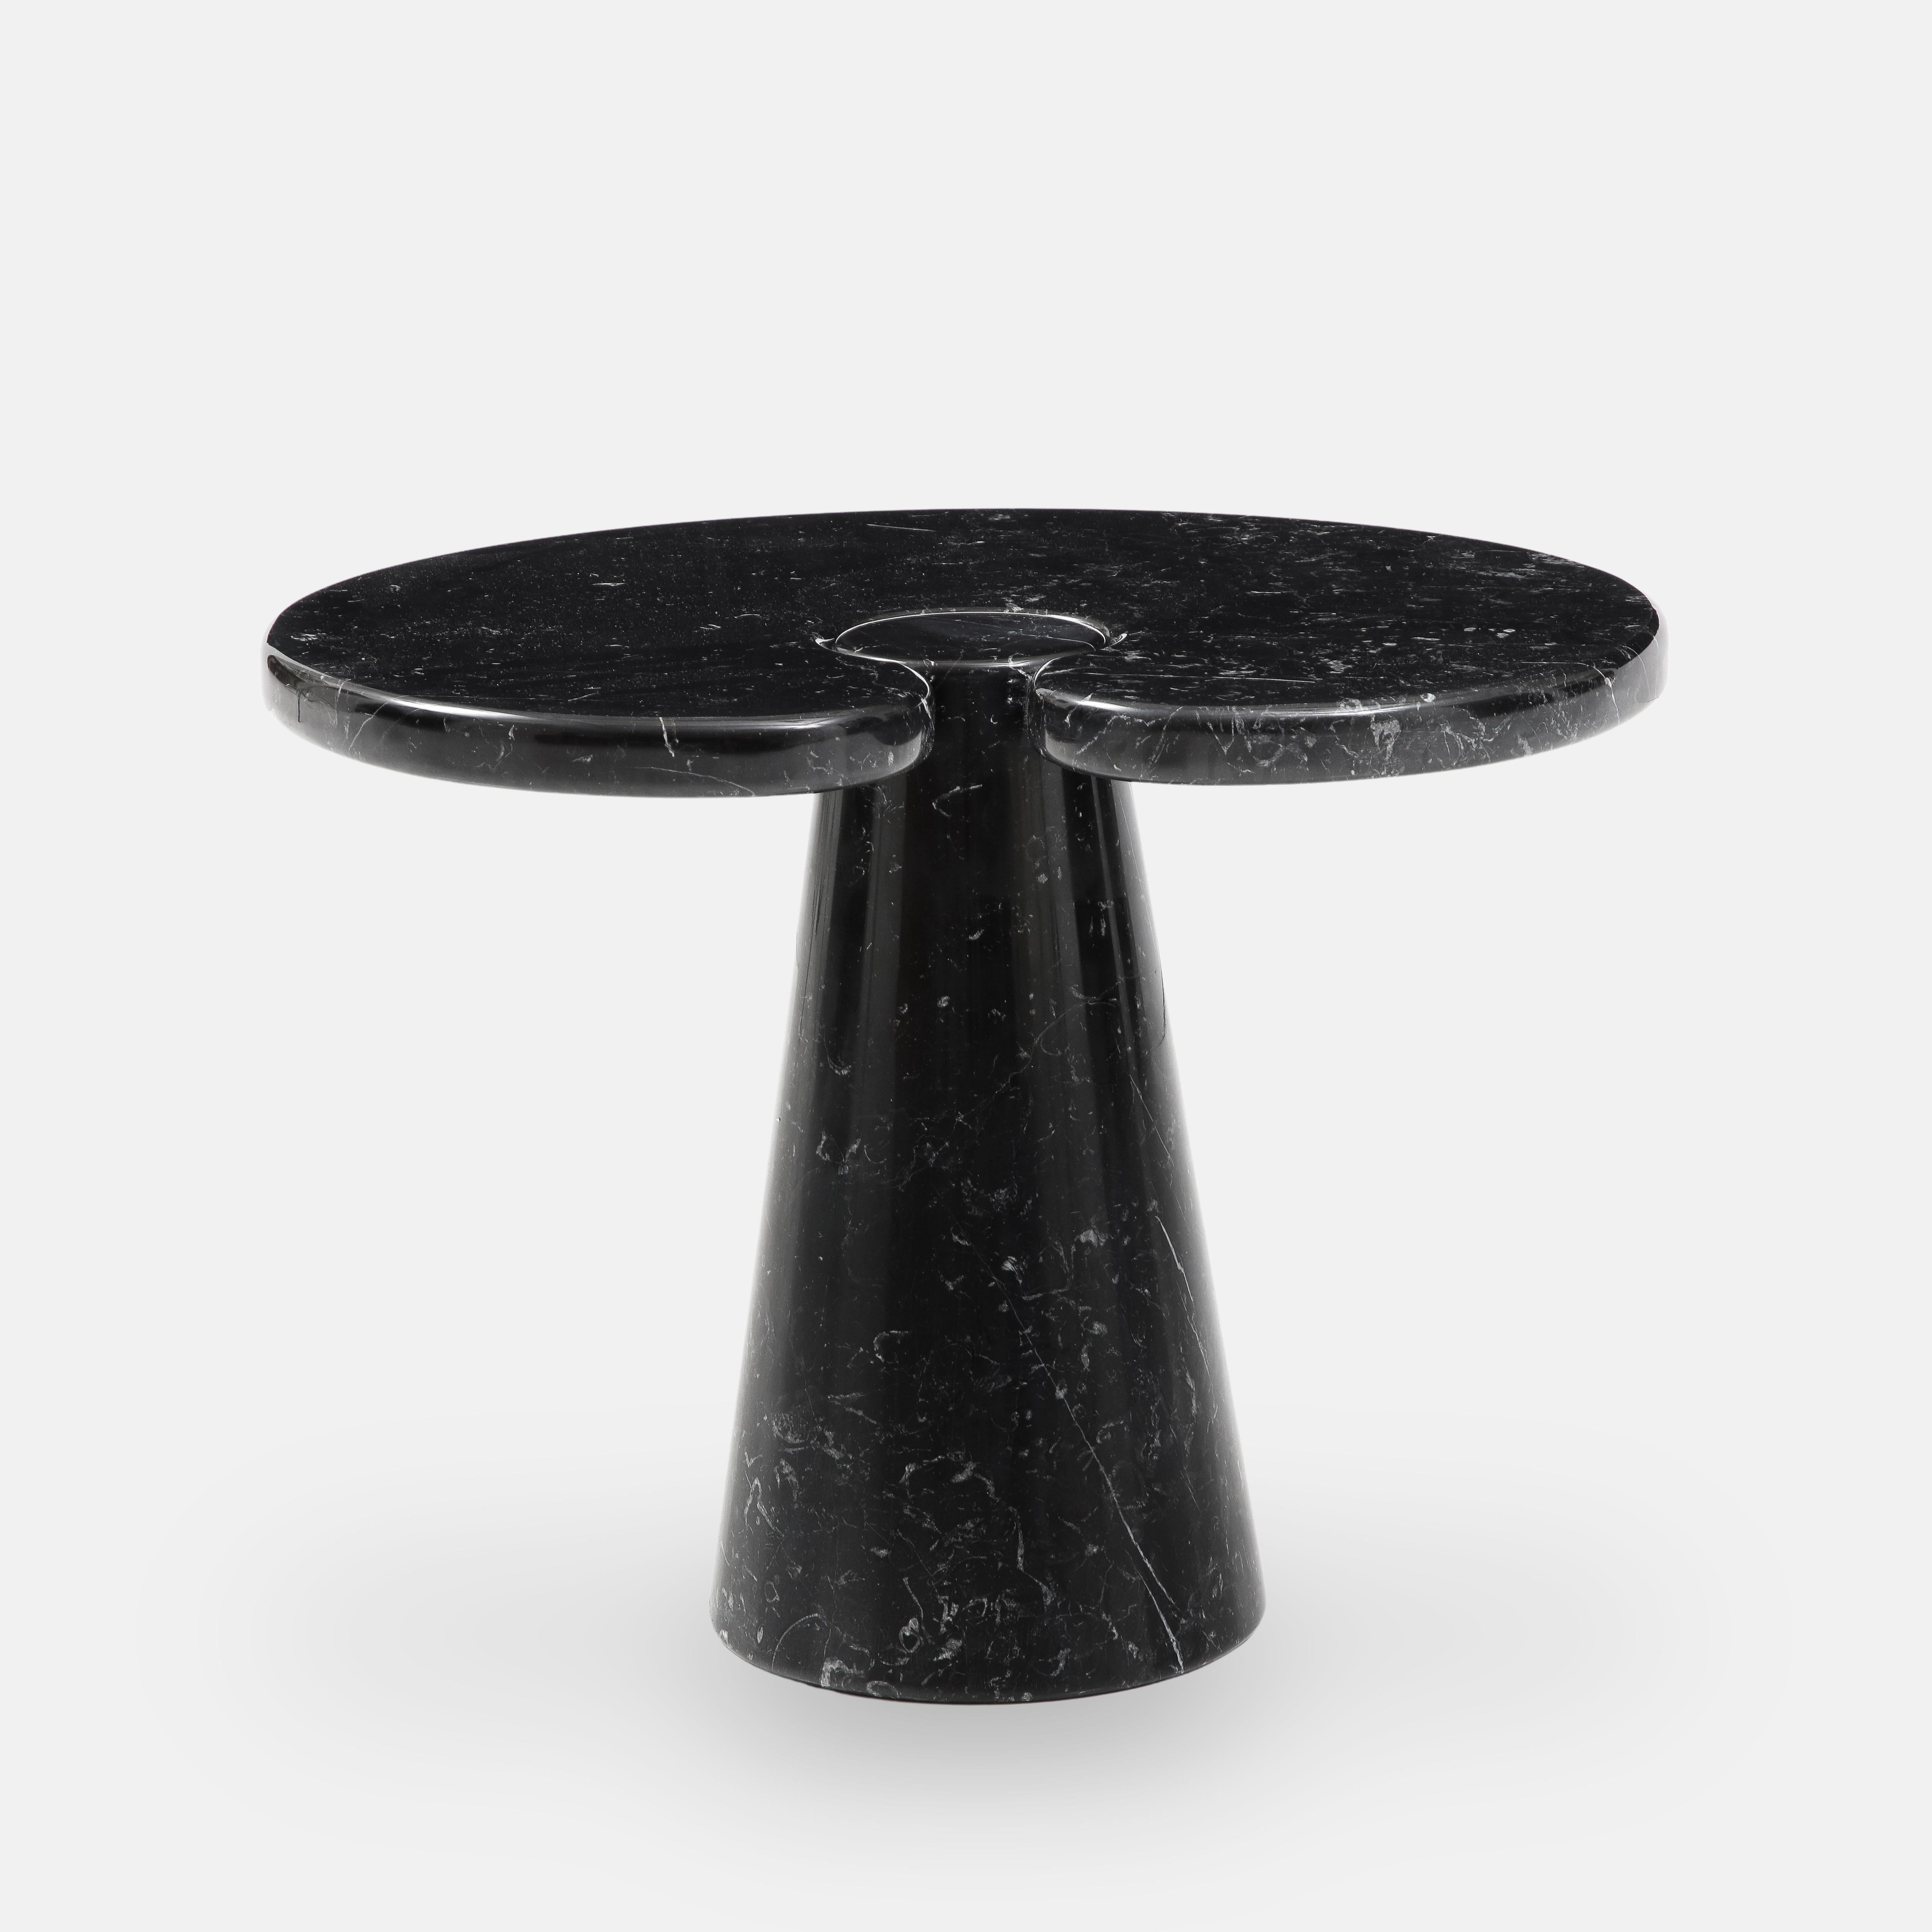 Designed by Angelo Mangiarotti for Skipper from the Eros series, Nero Marquina marble side table with top fitted on conical base. This elegantly organic table has beautiful subtle veining throughout. Original Skipper label on underside. As the label